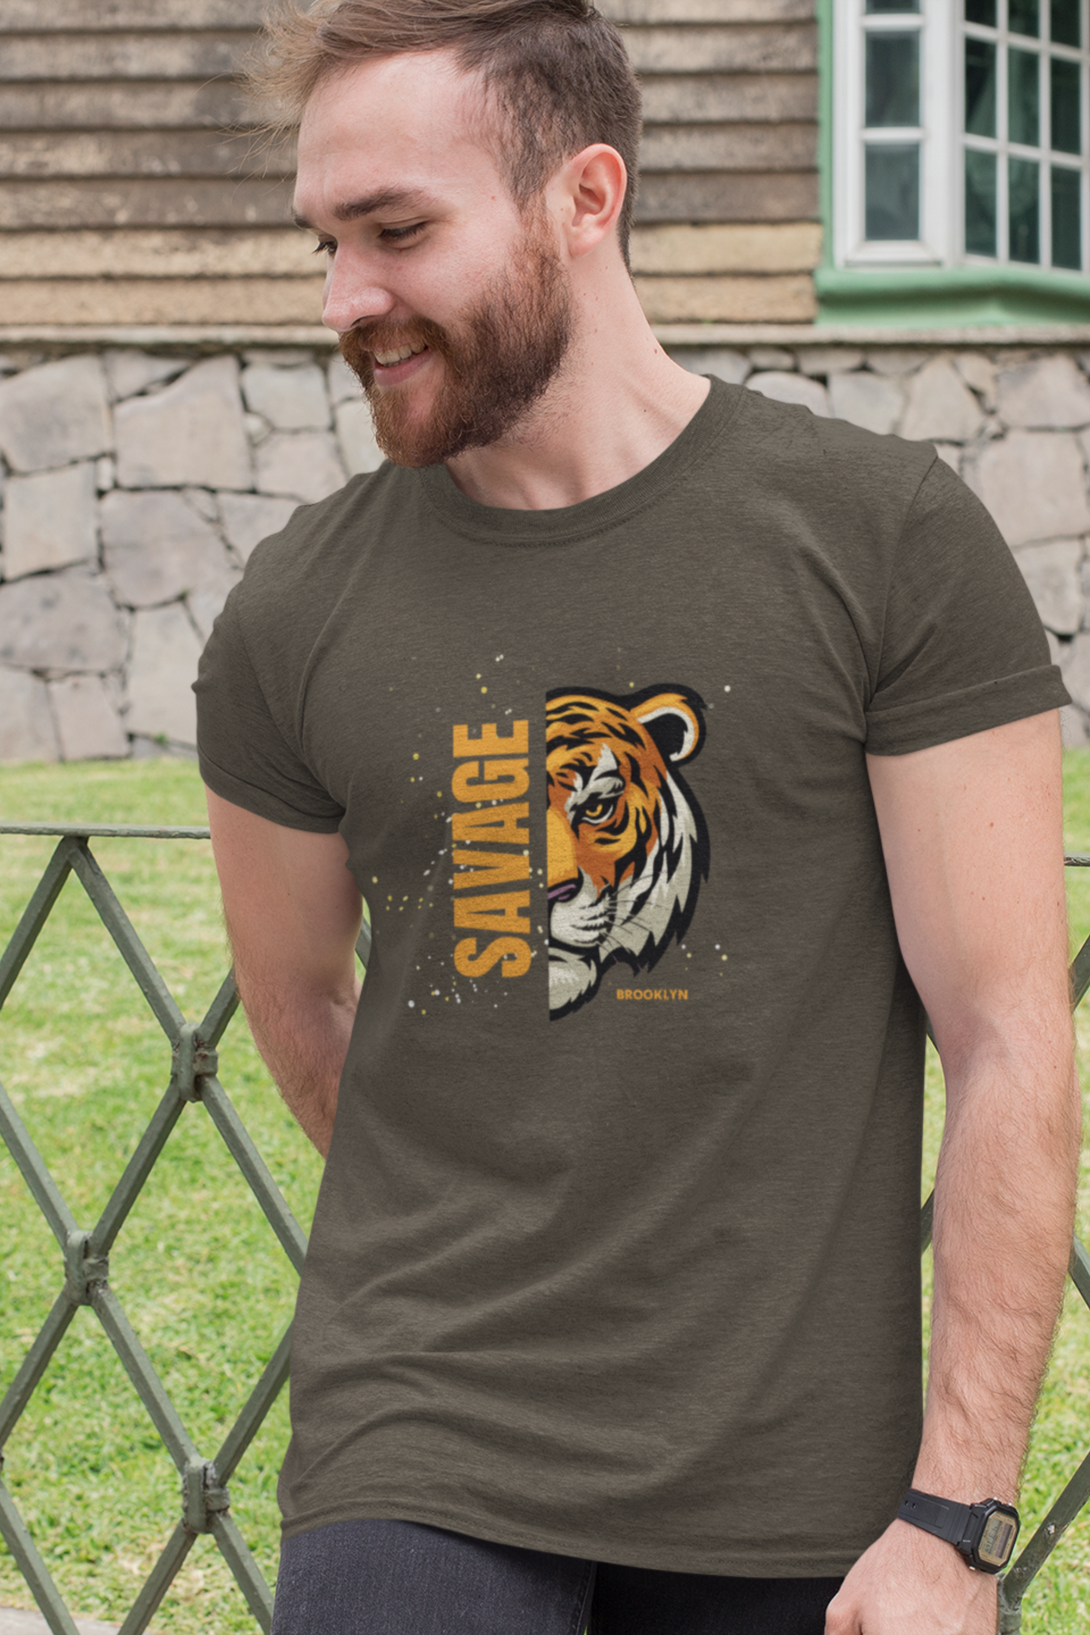 Save The Tiger Printed T-Shirt For Men - WowWaves - 2